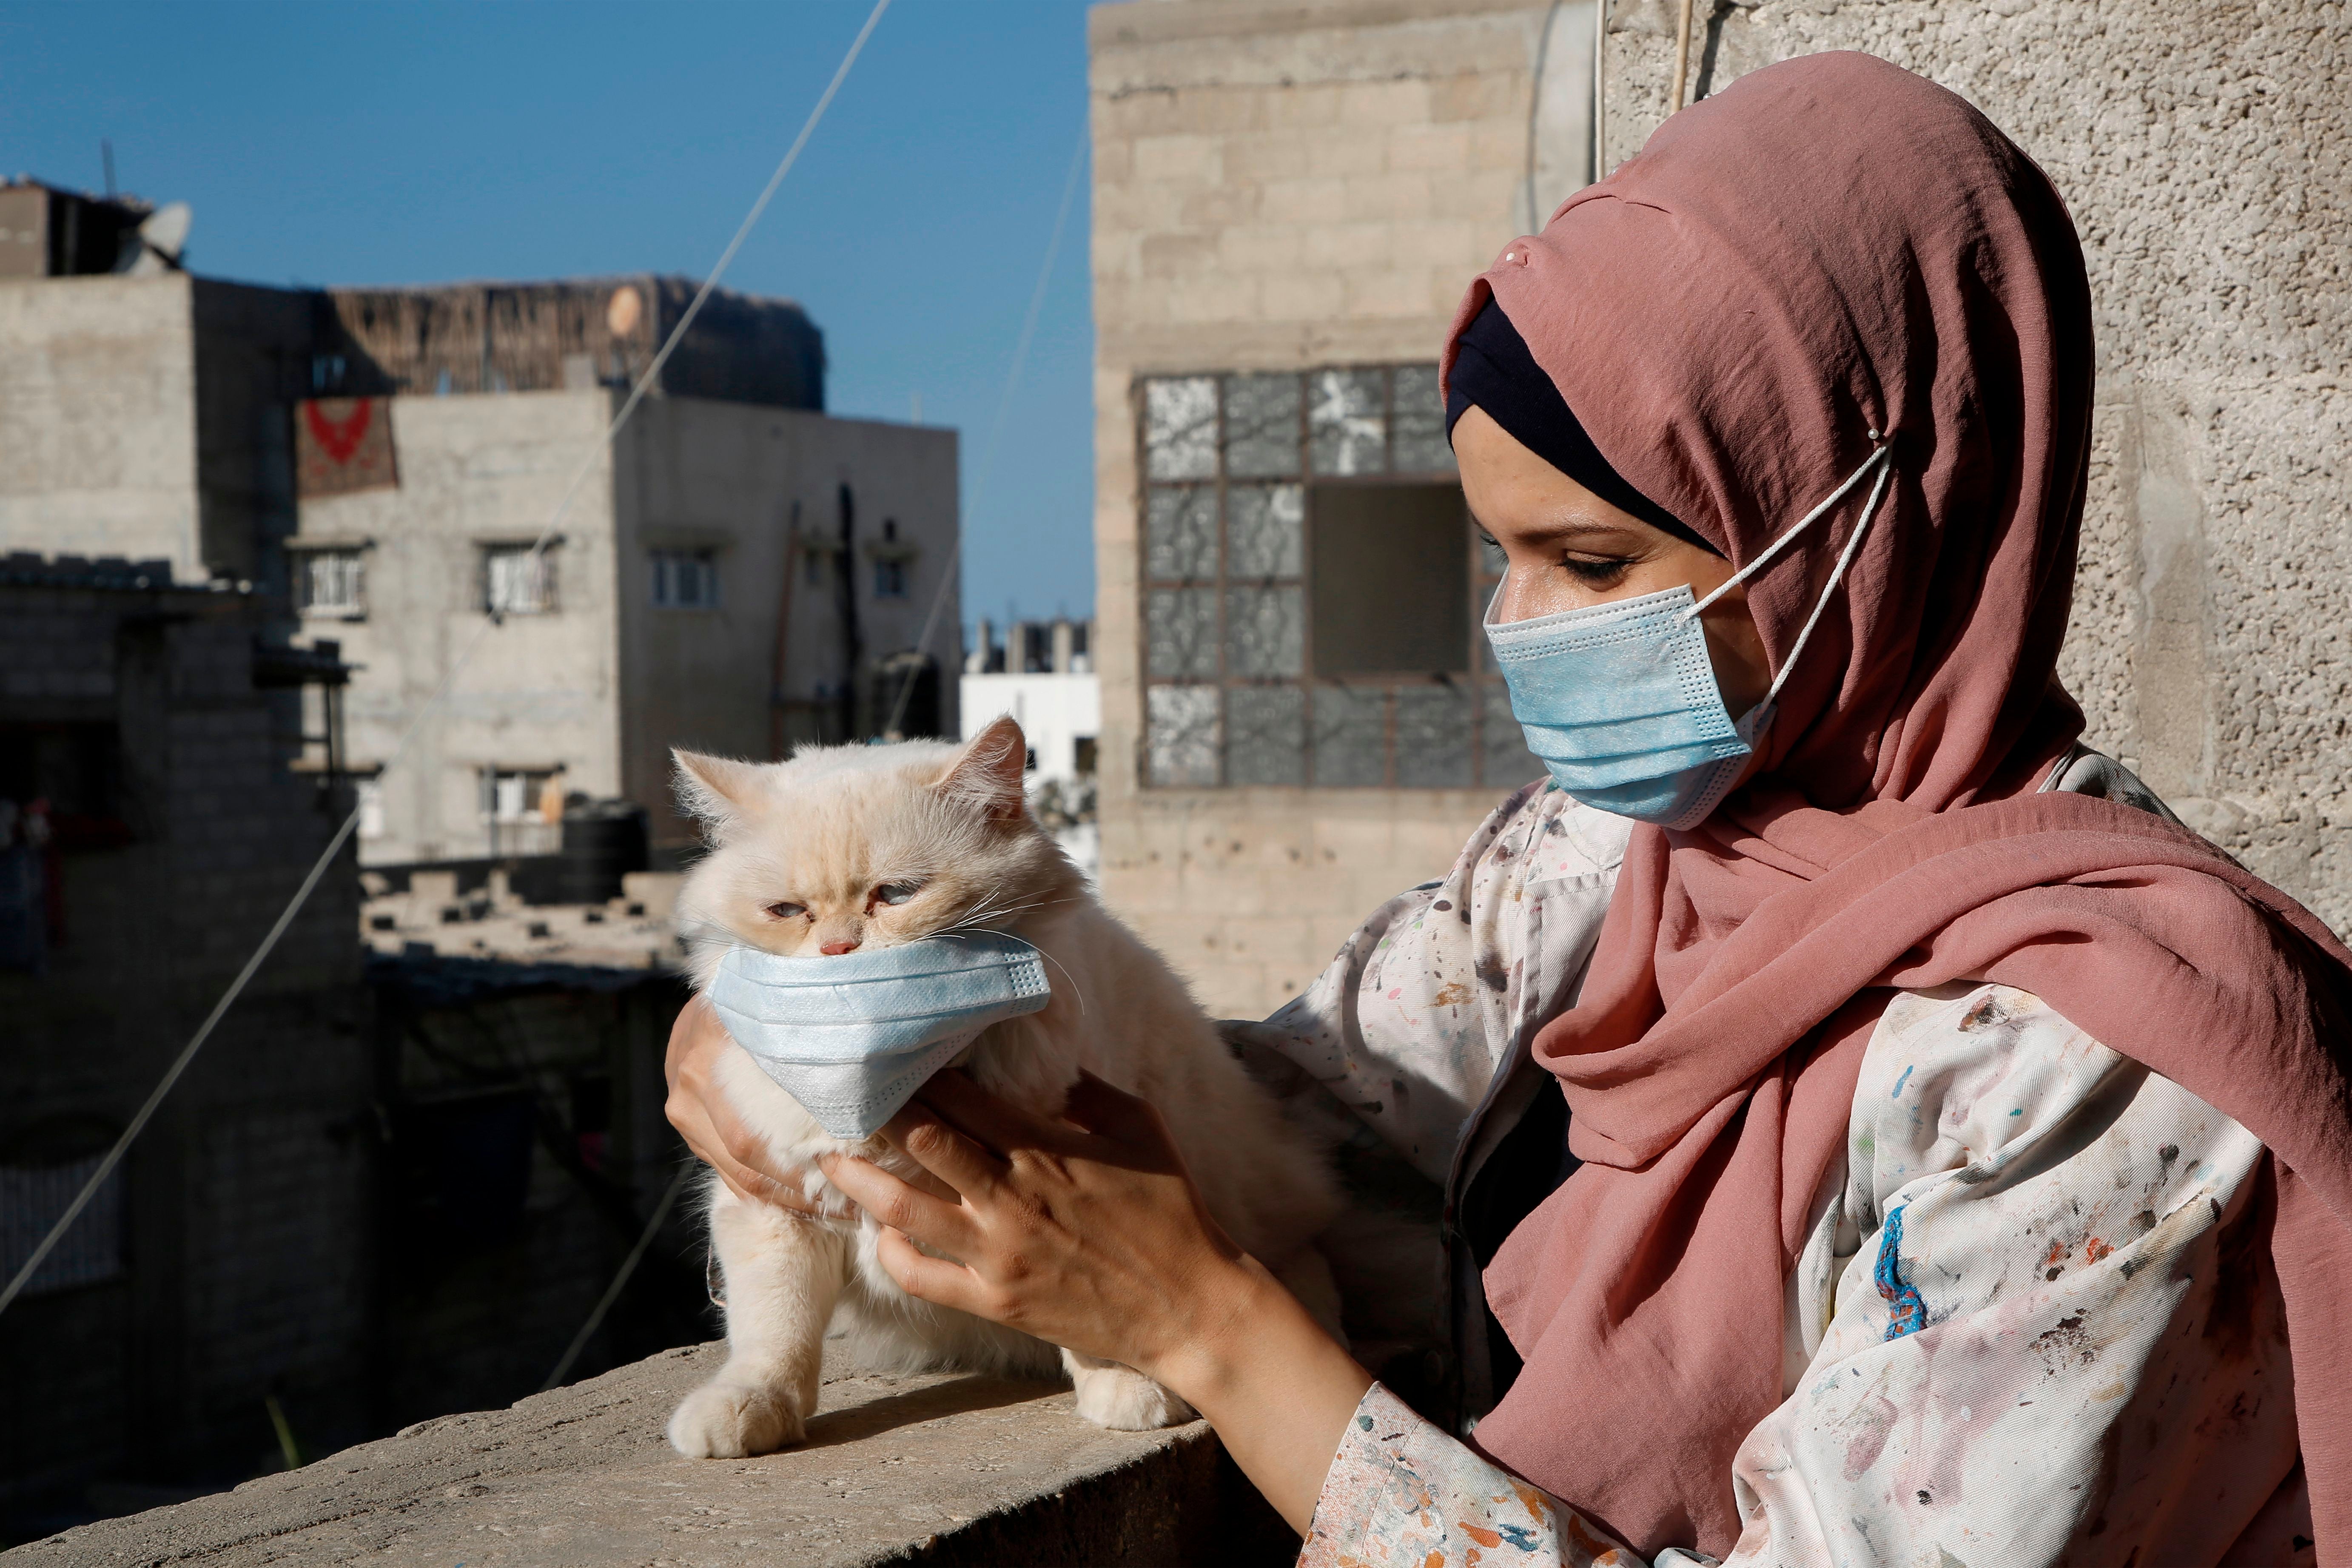 Palestinian artist Khulud al-Desouki pets a cat during lockdown at home in Khan Yunis in the southern Gaza Strip